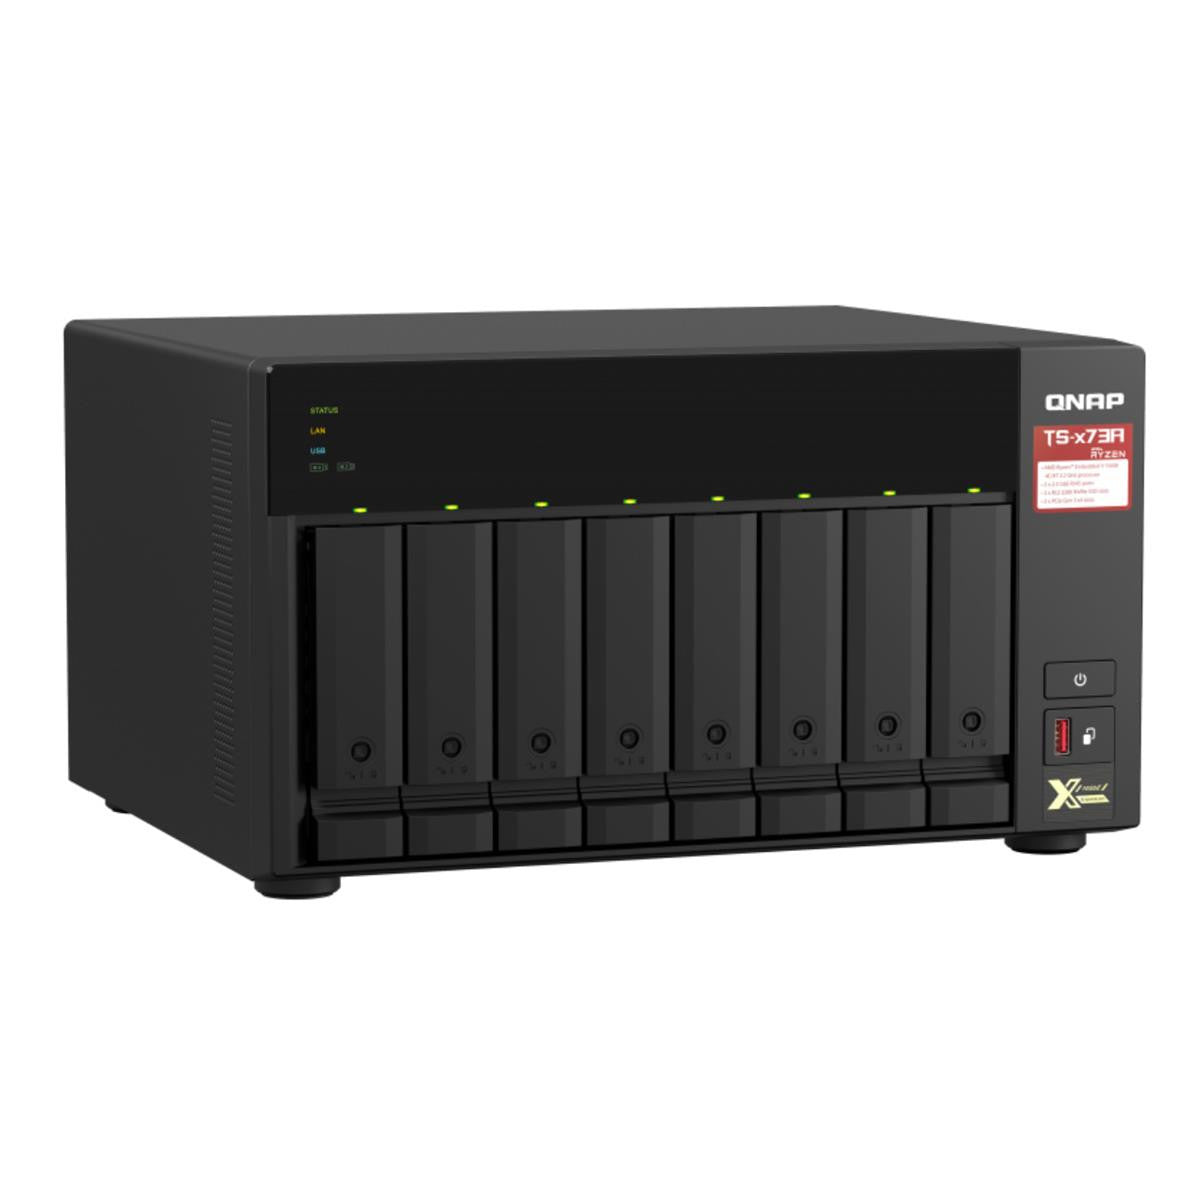 QNAP TS-873A 8-BAY NAS with 16GB DDR4 RAM and 112TB (8x14TB) Western Digital RED PLUS Drives Fully Assembled and Tested